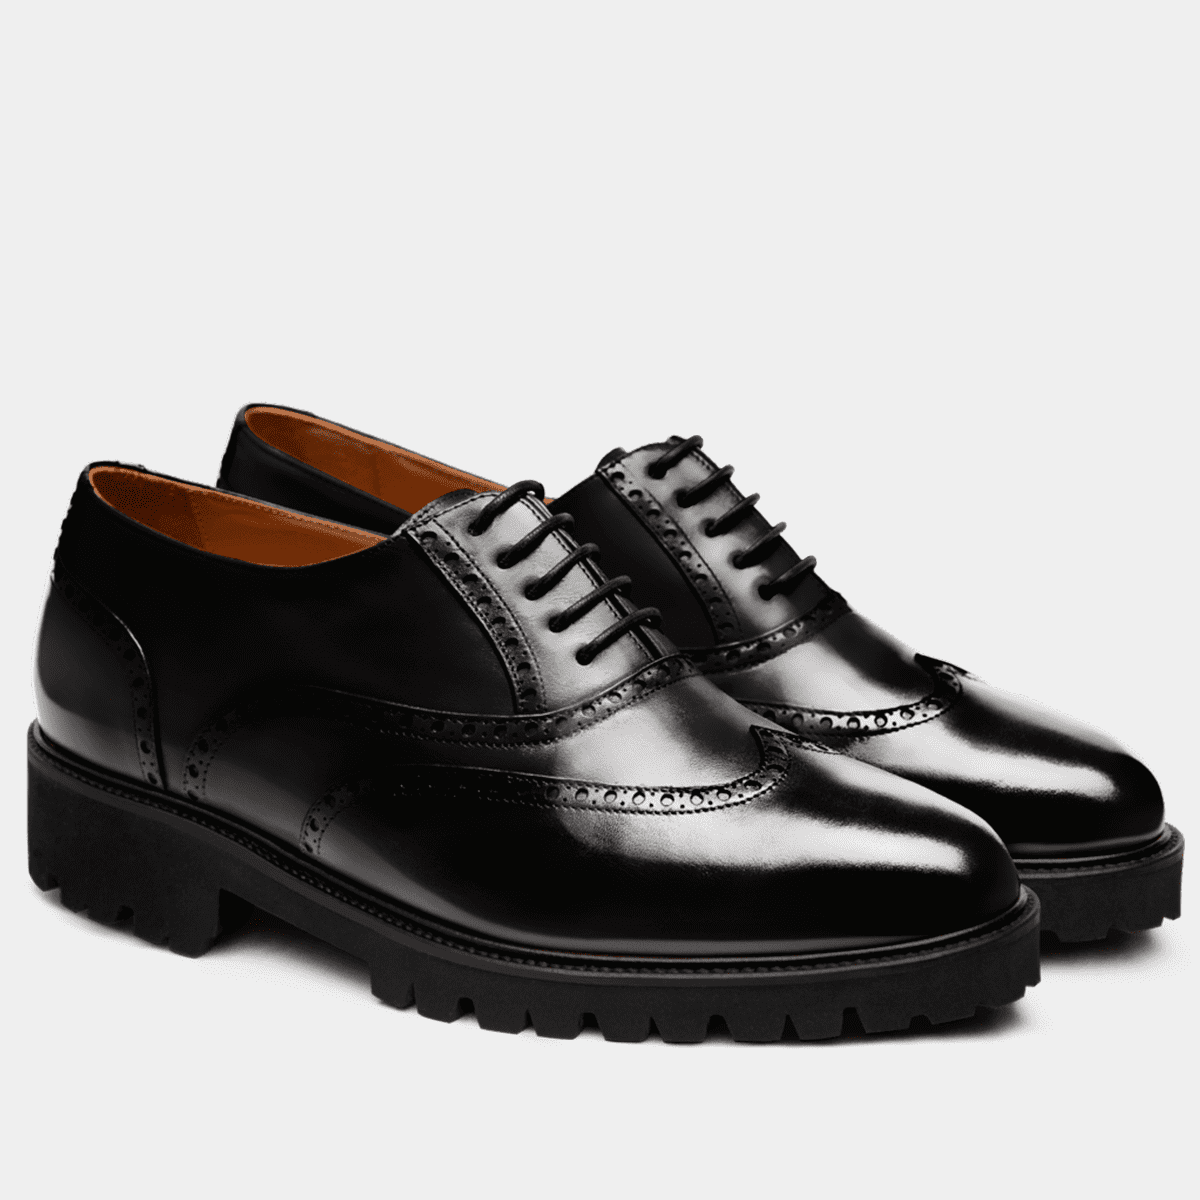 Black Leather Derby Shoes with Dress Shirt Outfits For Women (5 ideas &  outfits)